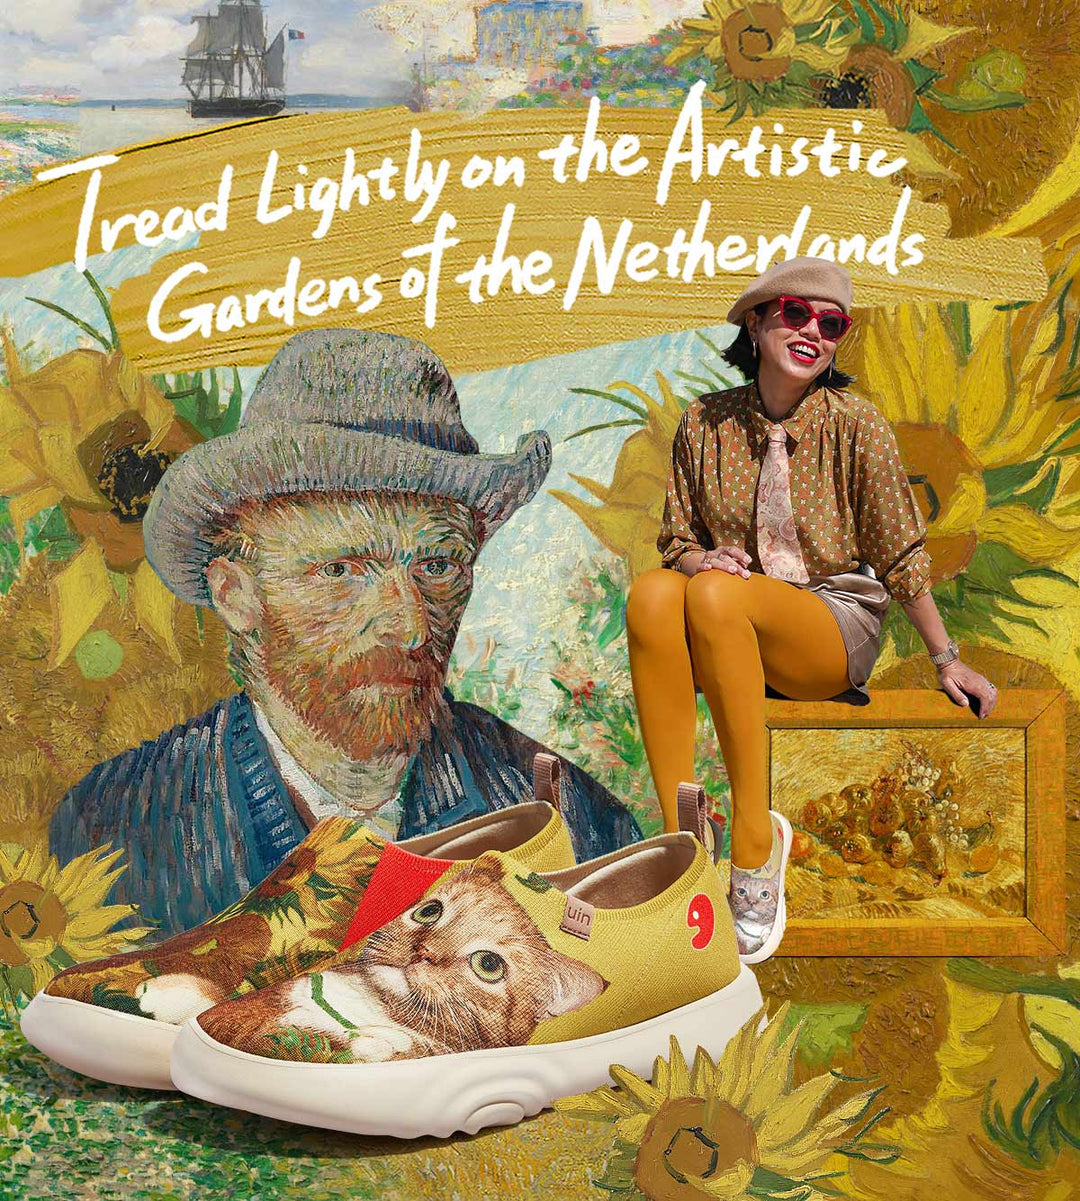 Tread Lightly on the Artistic Gardens of the Netherlands